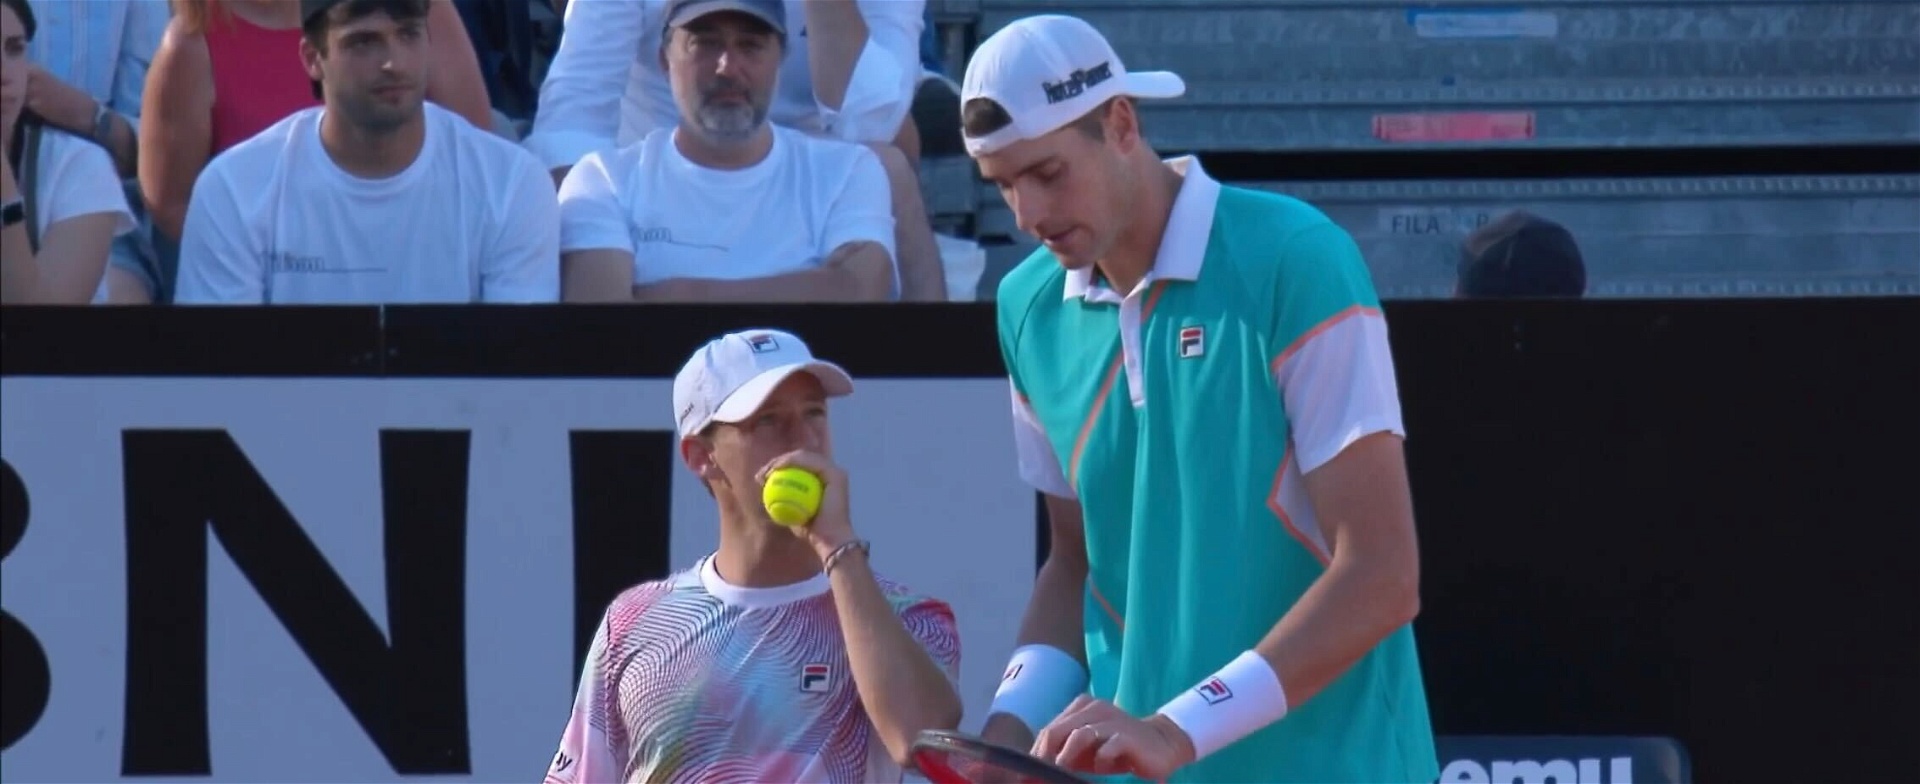 Tennis Isner Schwarztman wow Rome crowd with their play and combination